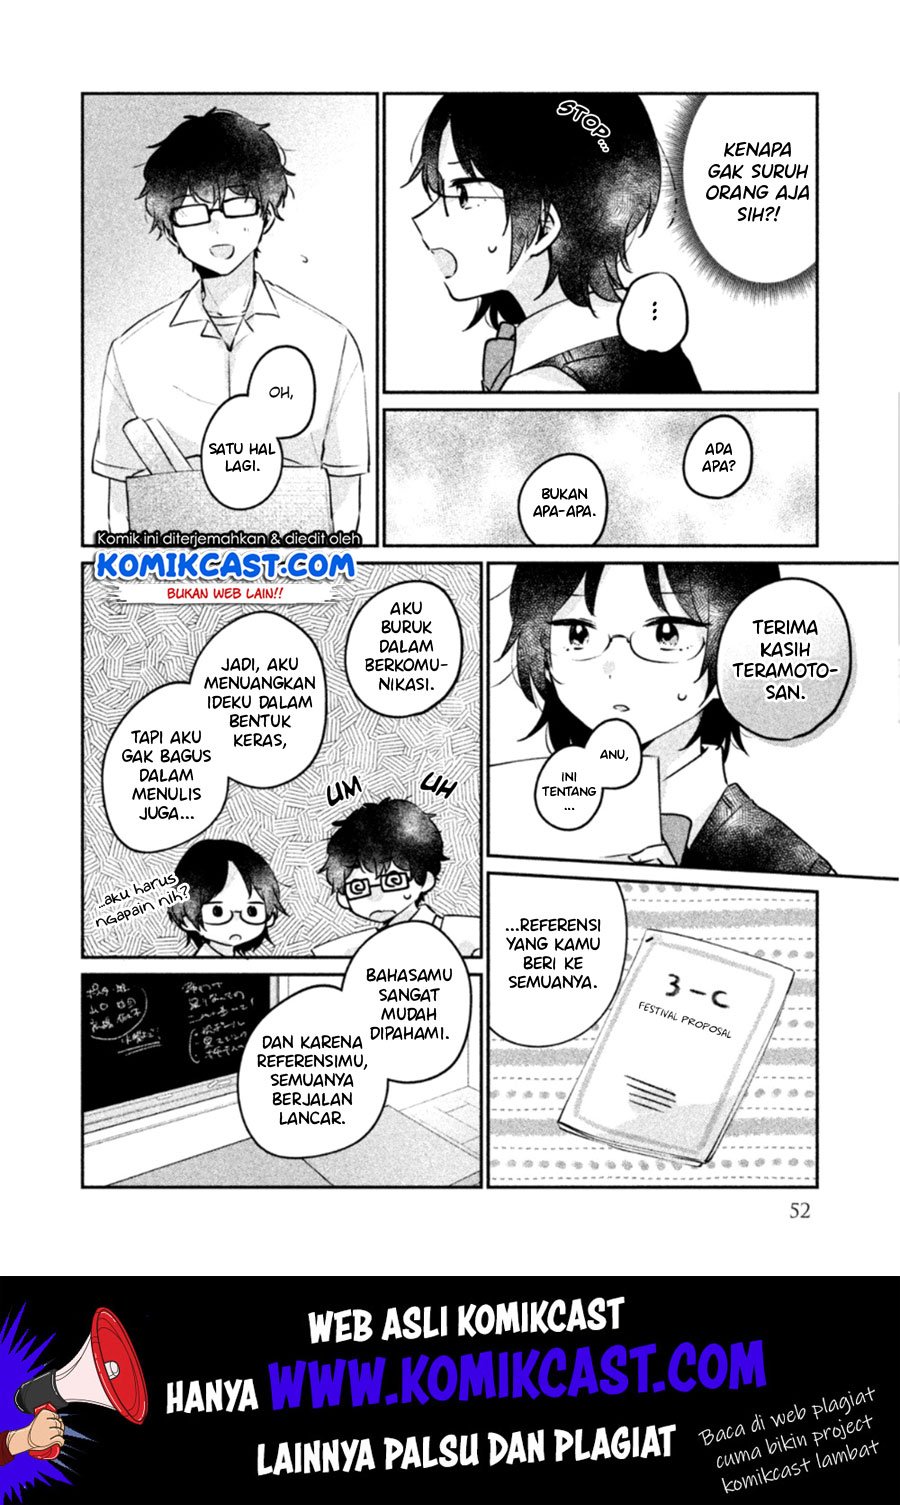 It’s Not Meguro-san’s First Time Chapter 21